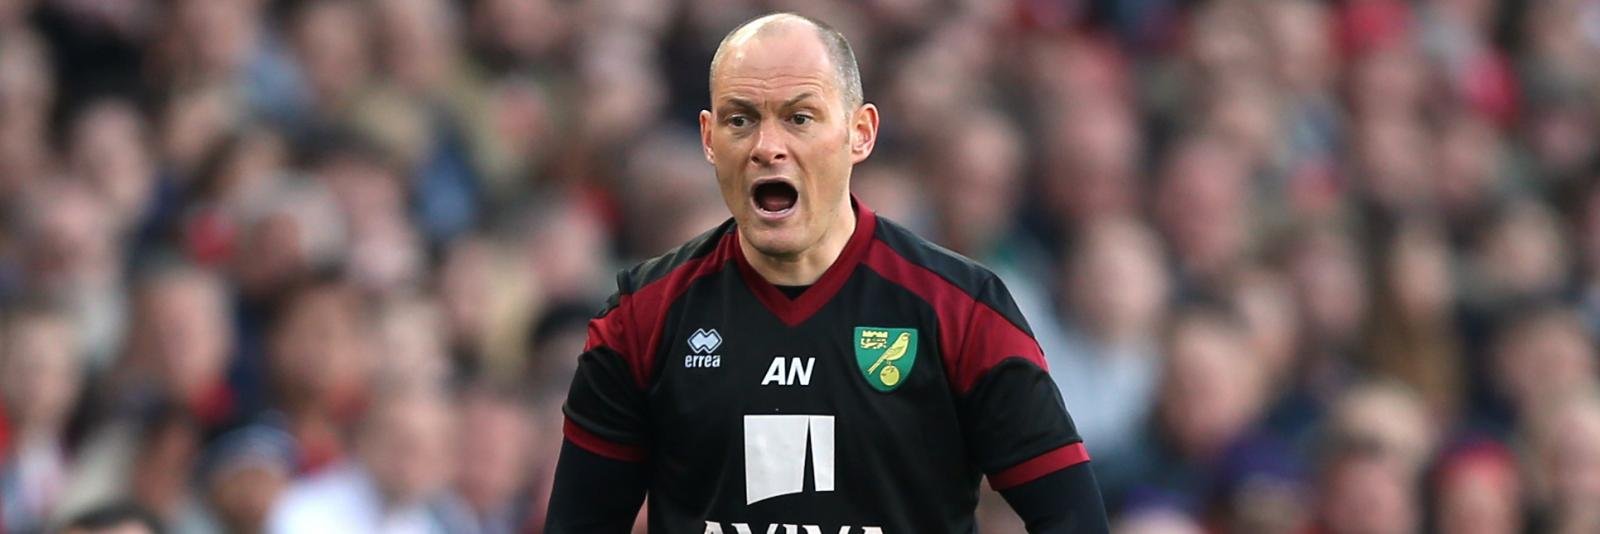 Have faith in Alex Neil – One of my favourite Norwich City bosses of my lifetime